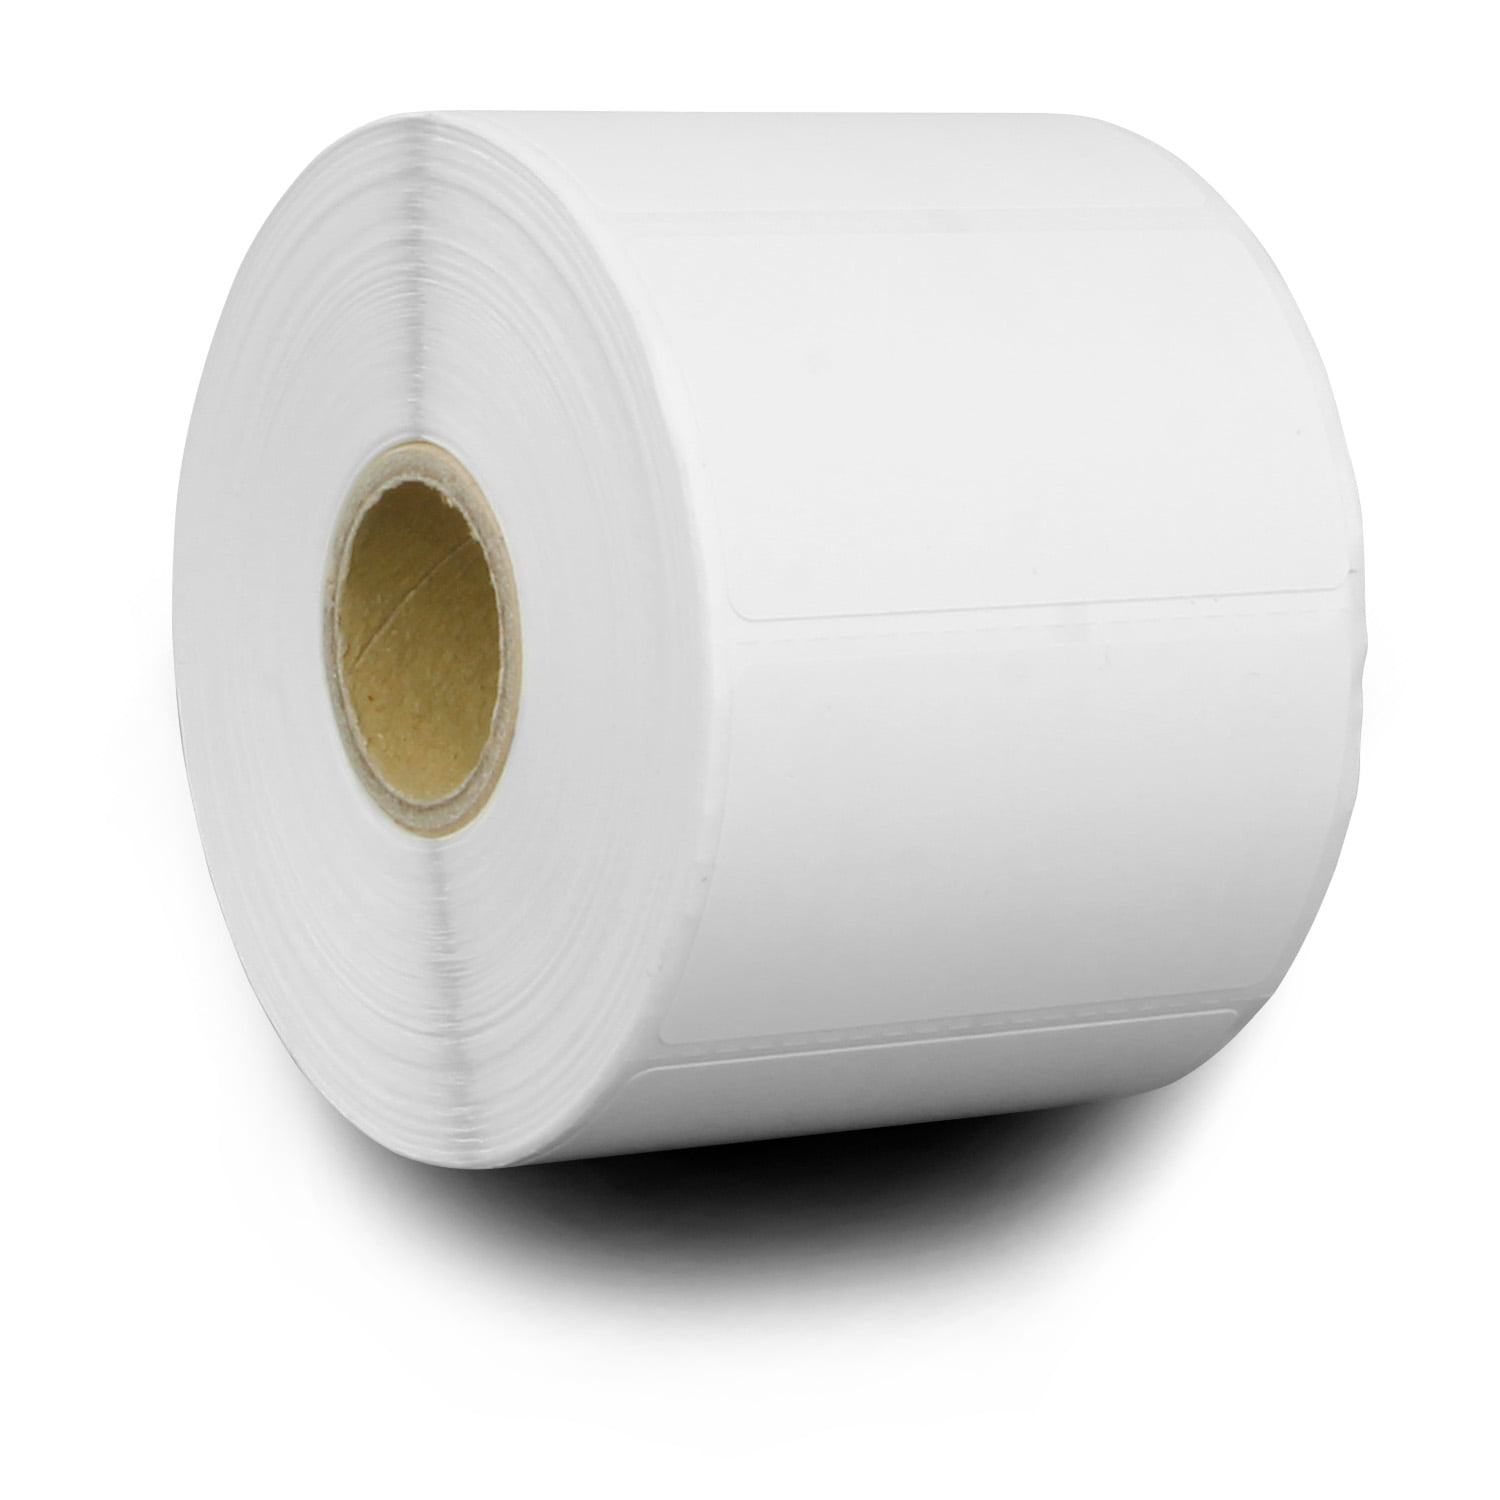 2.25 x 1.25 Labels 50 2-1/4 x 1-1/4 Zebra/Eltron Compatible 2.25 x 1.25 Yellow Direct Thermal Labels - BPA Free! Fifty Rolls; 1,000 per Roll 